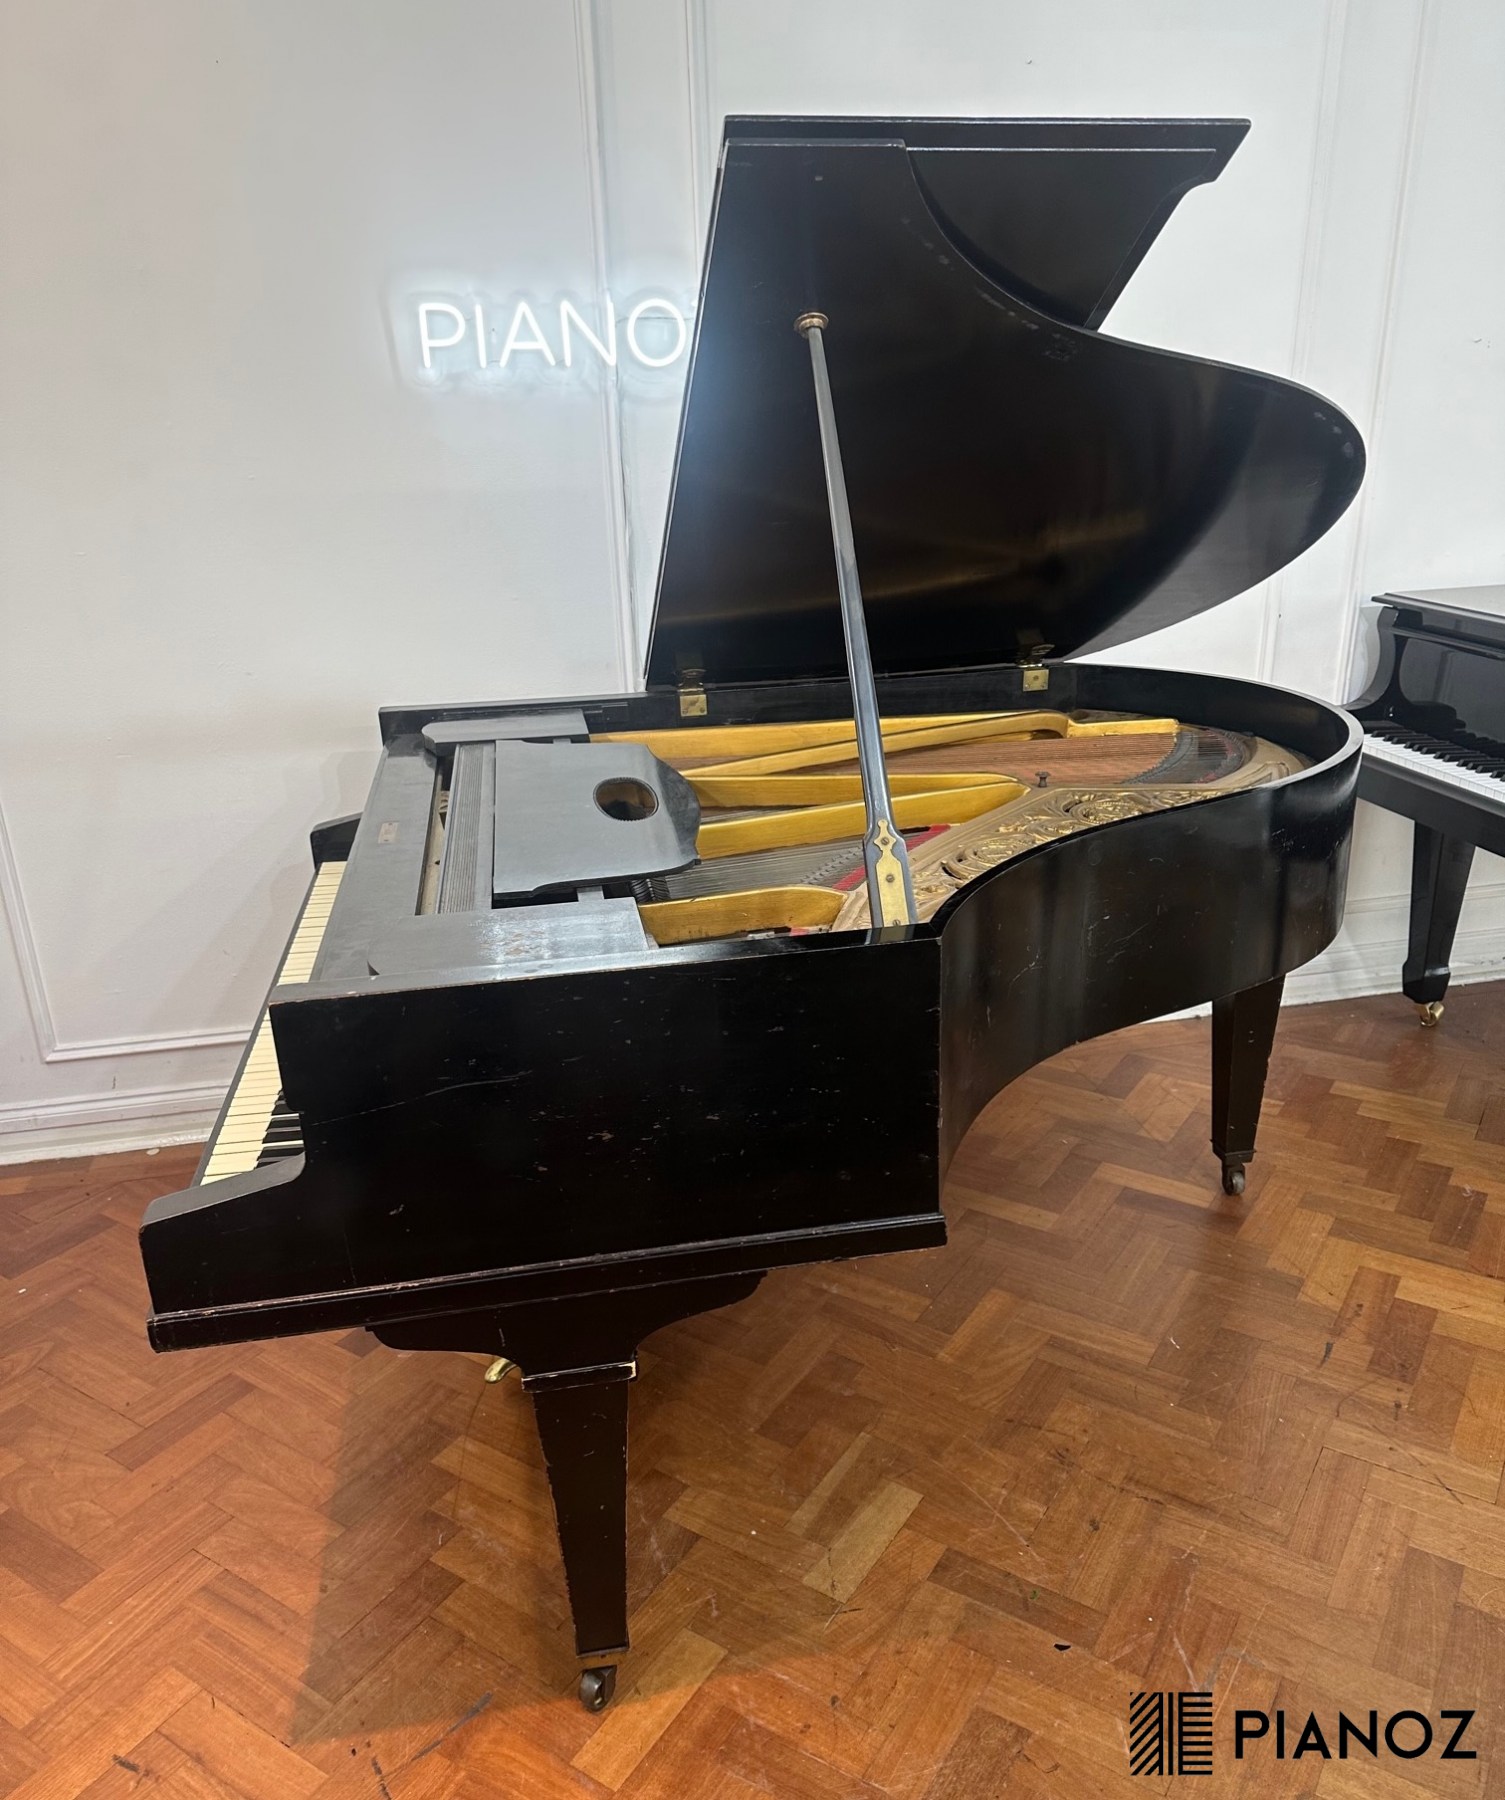 Schimmel Antique Baby Grand Piano piano for sale in UK